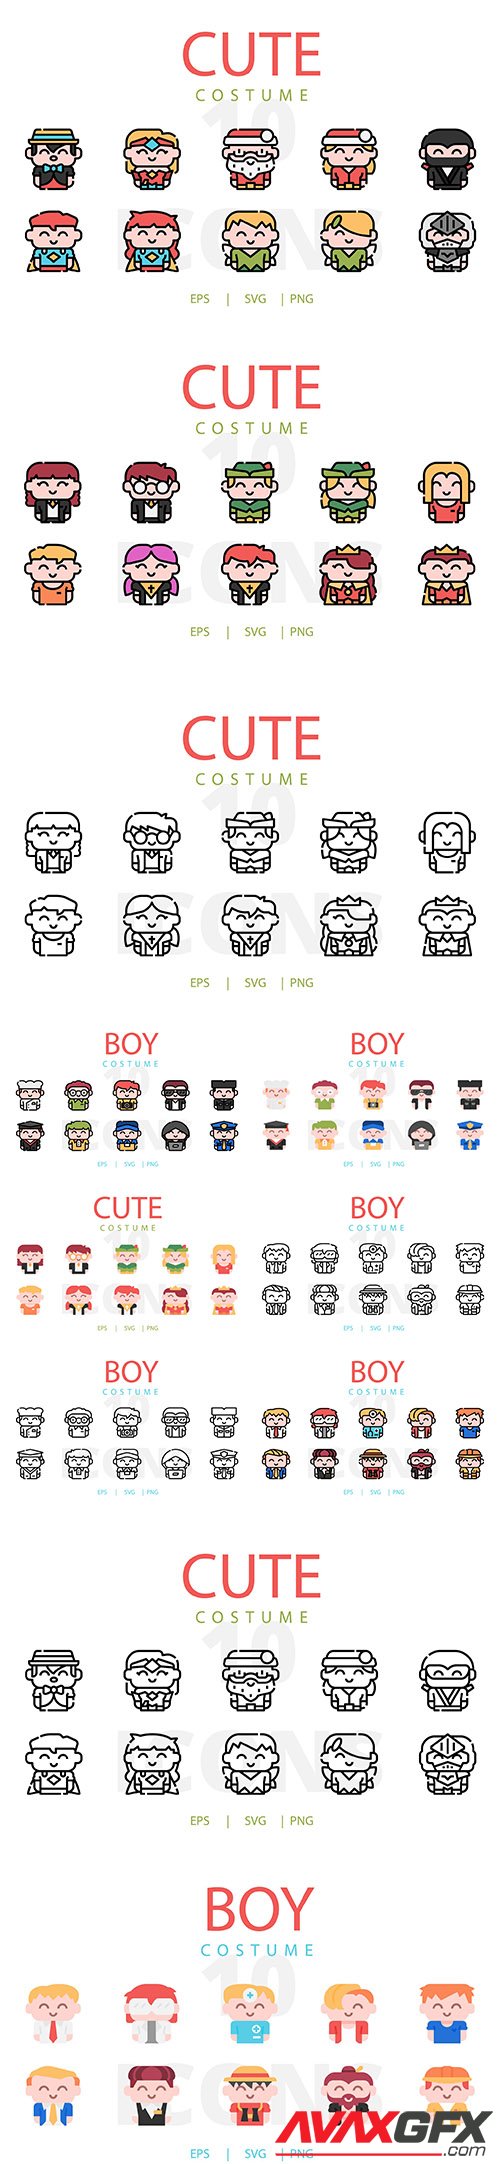 Kids Costume Vector Icons Collection Vol 2